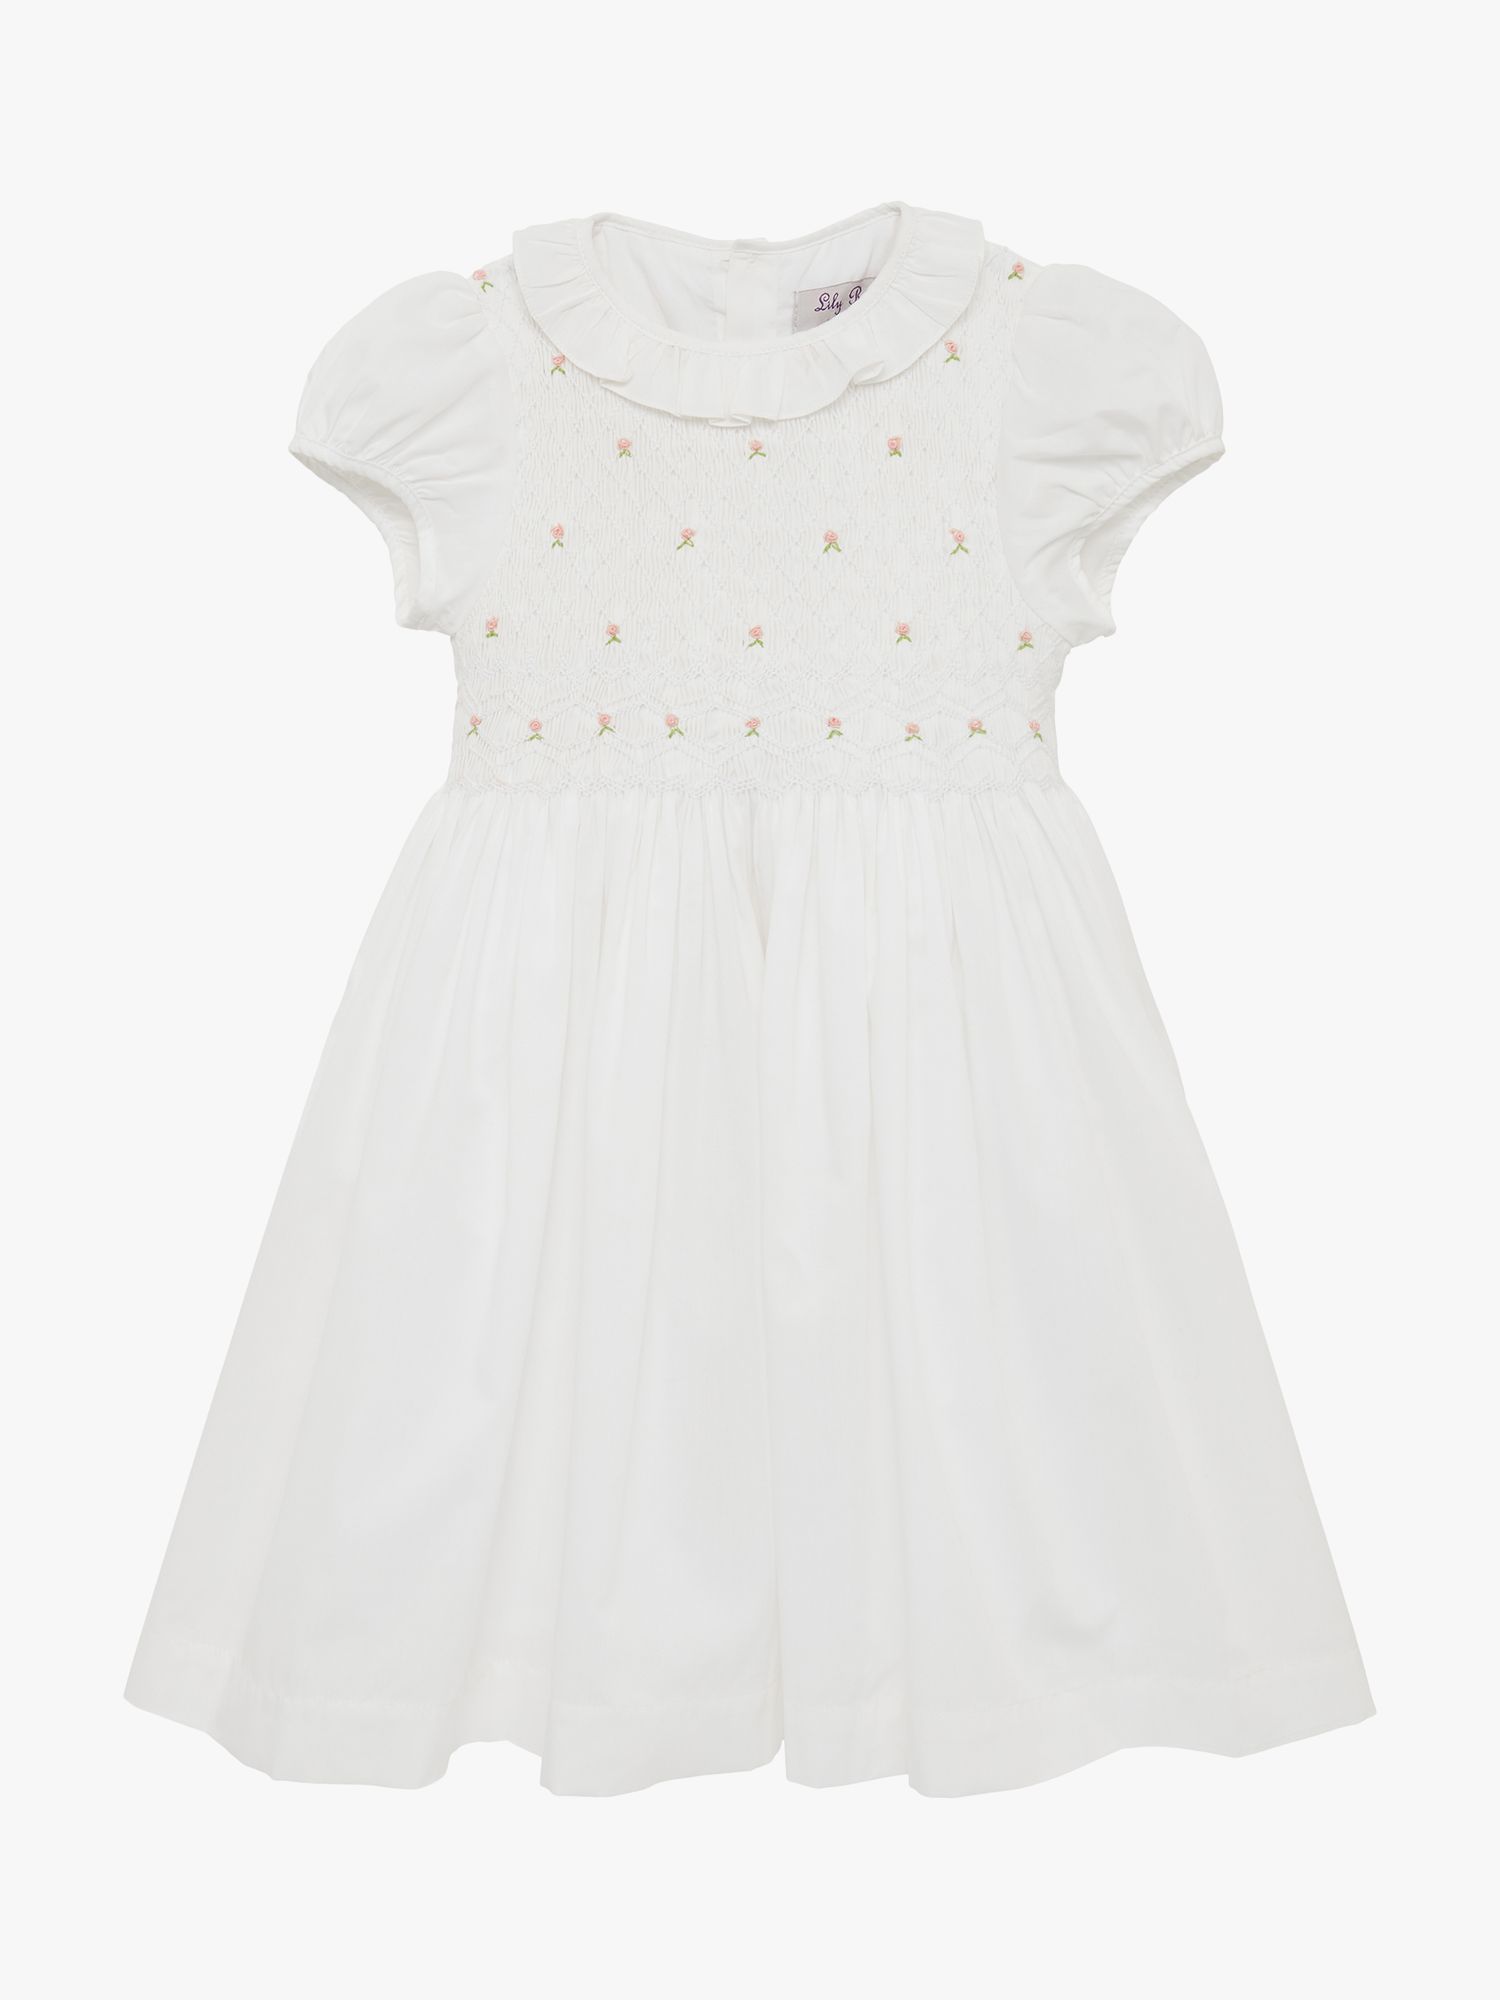 Trotters Willow Baby Hand Smocked Bodice Dress, White at John Lewis ...